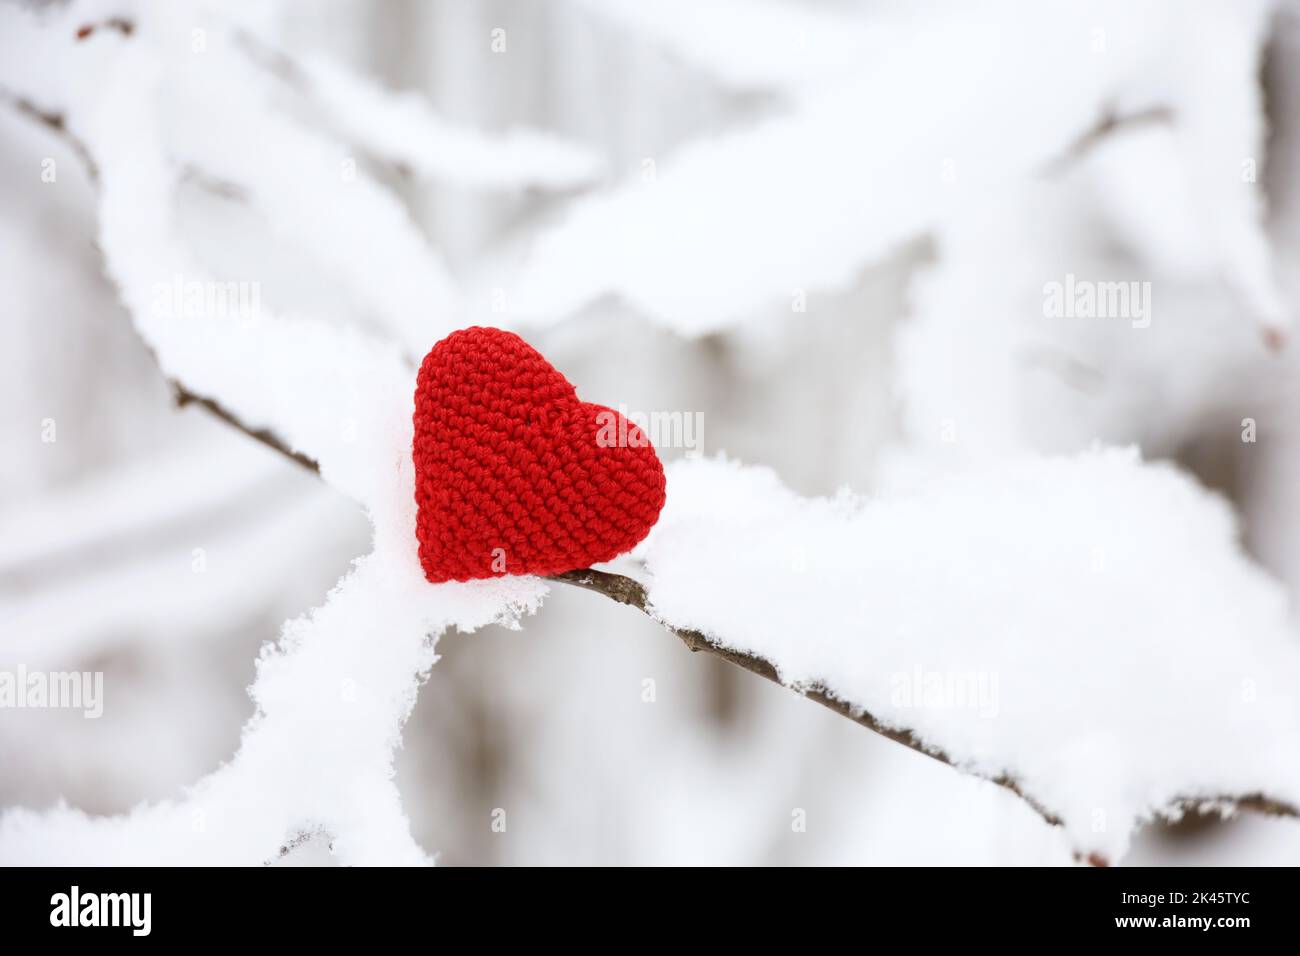 Valentine heart in winter forest, cold weather. Red knitted heart on snow covered branches, symbol of romantic love, Christmas holiday Stock Photo